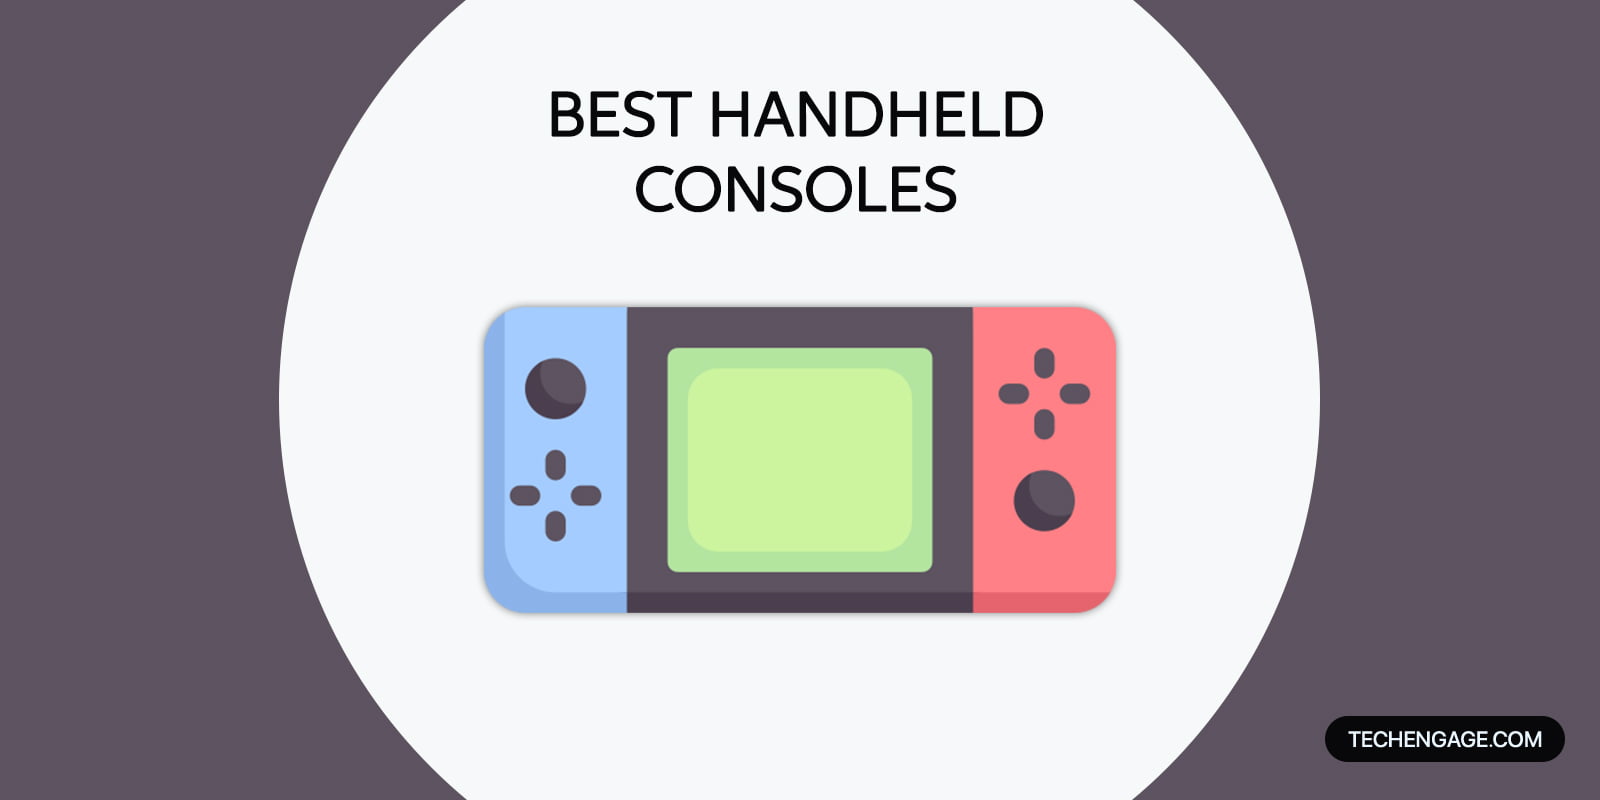 An Image of Handheld Consoles